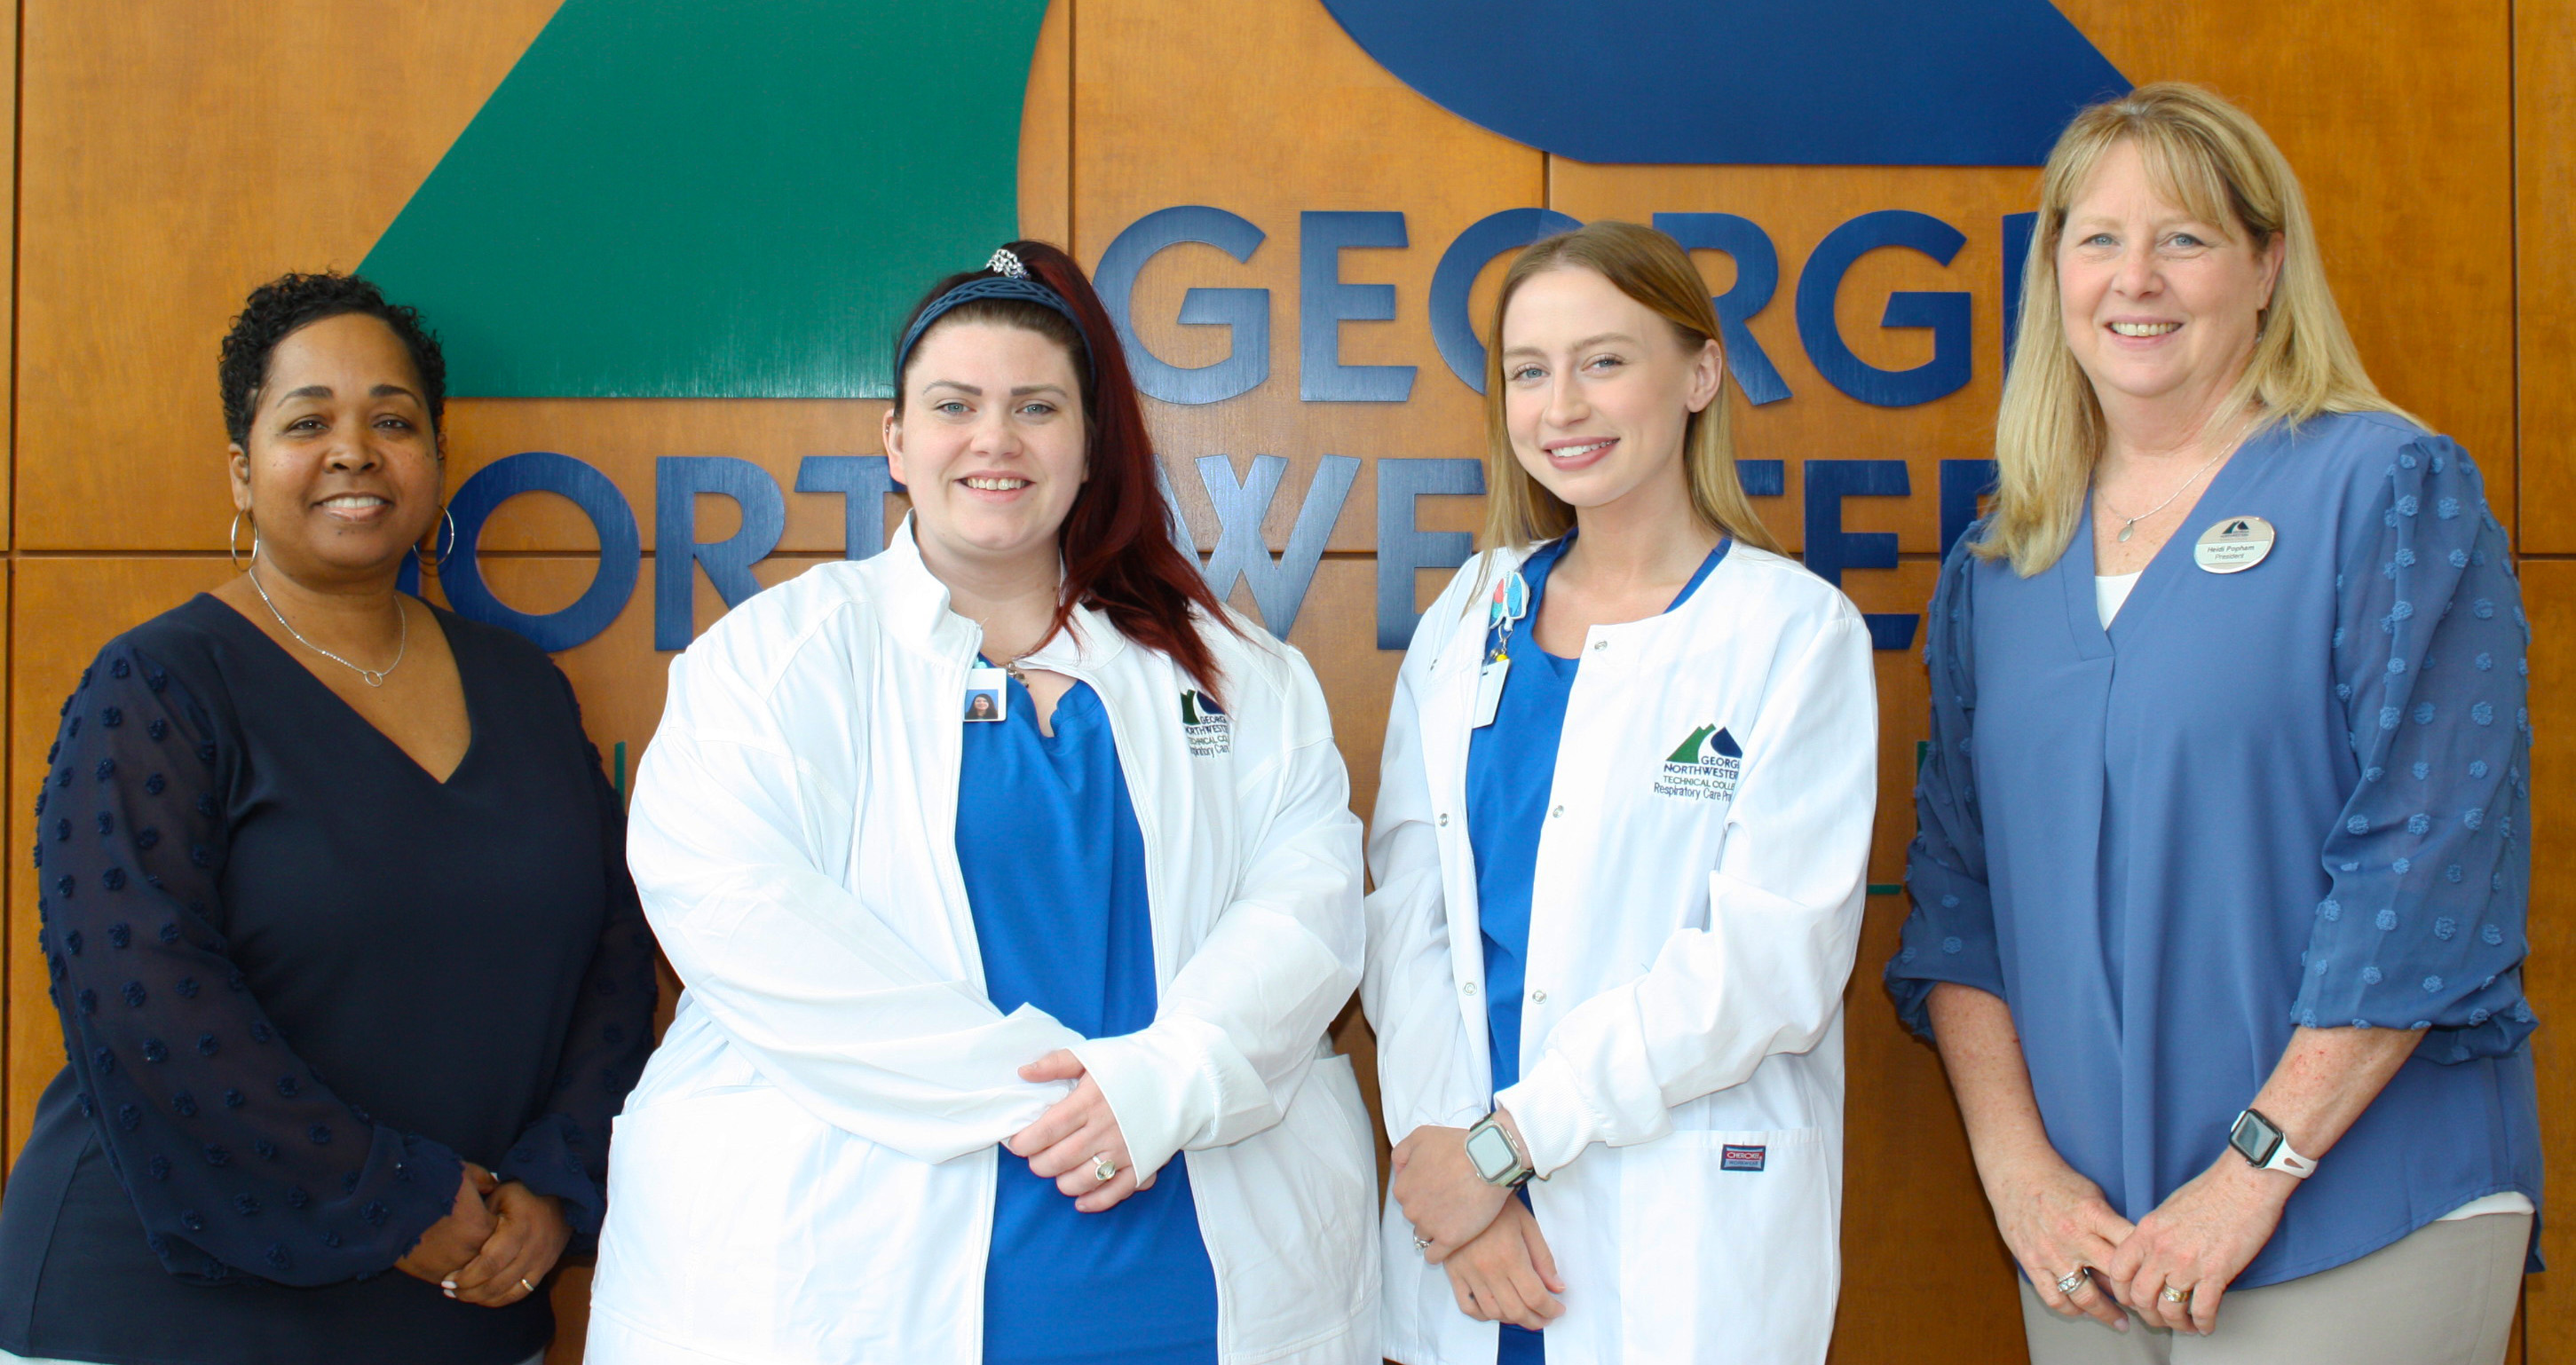 (From left) Zenia Bratton, program director and instructor of Respiratory Care at GNTC; students Reanna Story and Brook Atkinson; and Dr. Heidi Popham, GNTC president, celebrate the awarding of the scholarships.